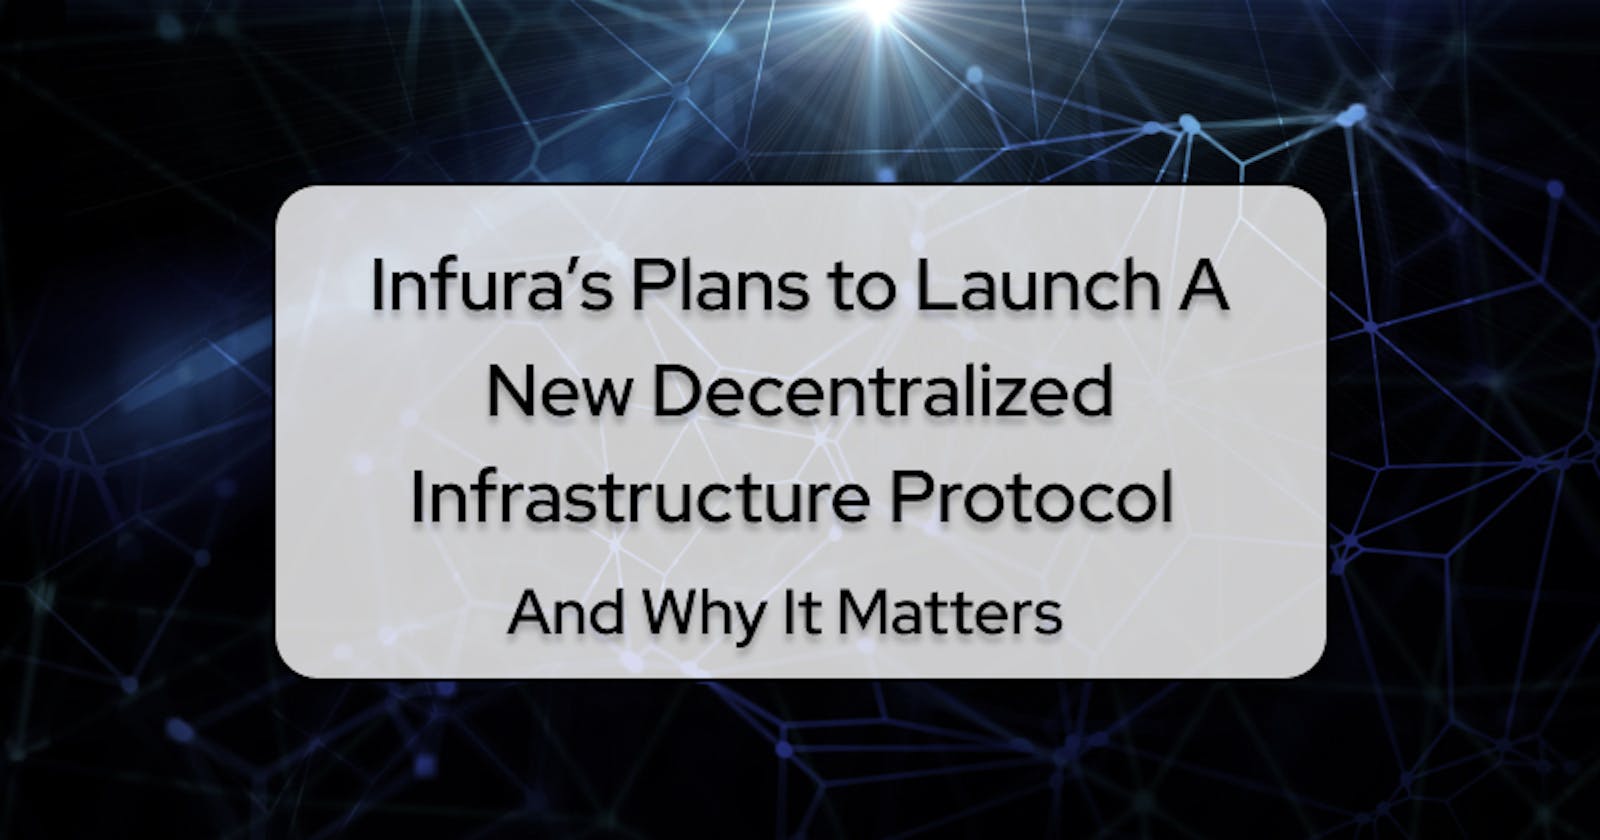 Infura’s Plans To Launch A New Decentralized Infrastructure Protocol And Why It Matters